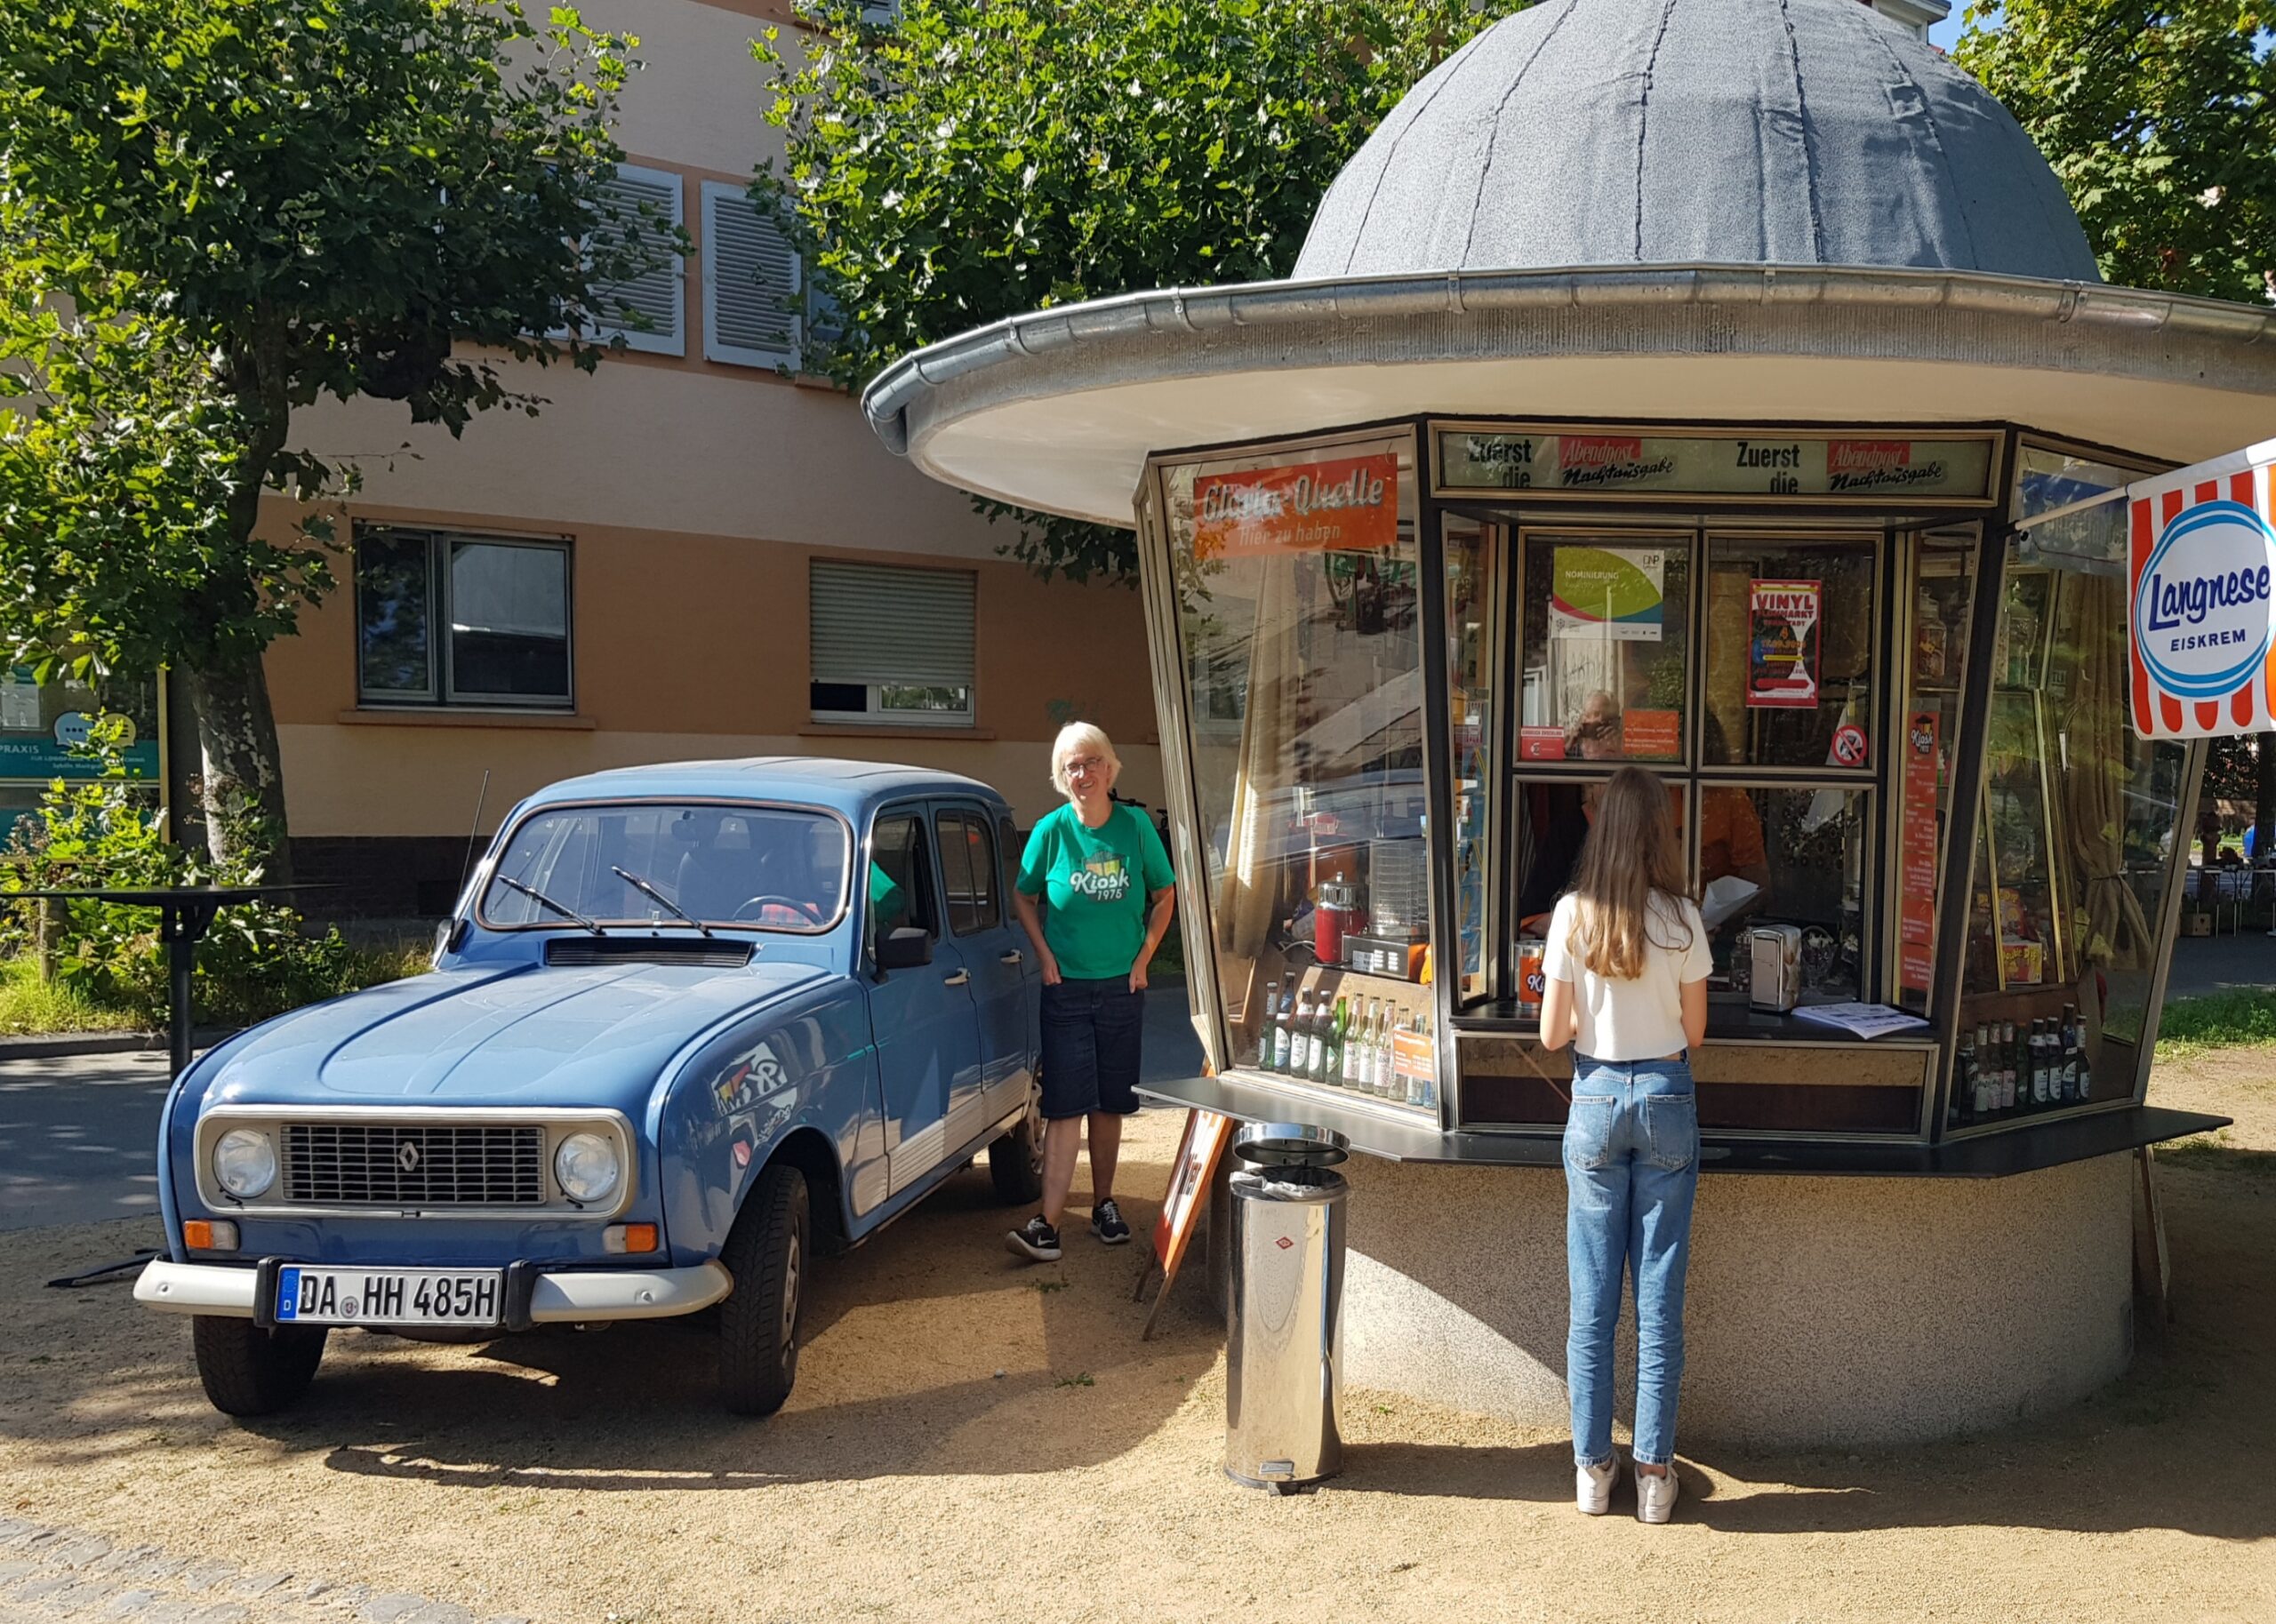 You are currently viewing Kiosk 1975: Spontaner R4 – Oldtimer-Besuch am Kiosk :-)